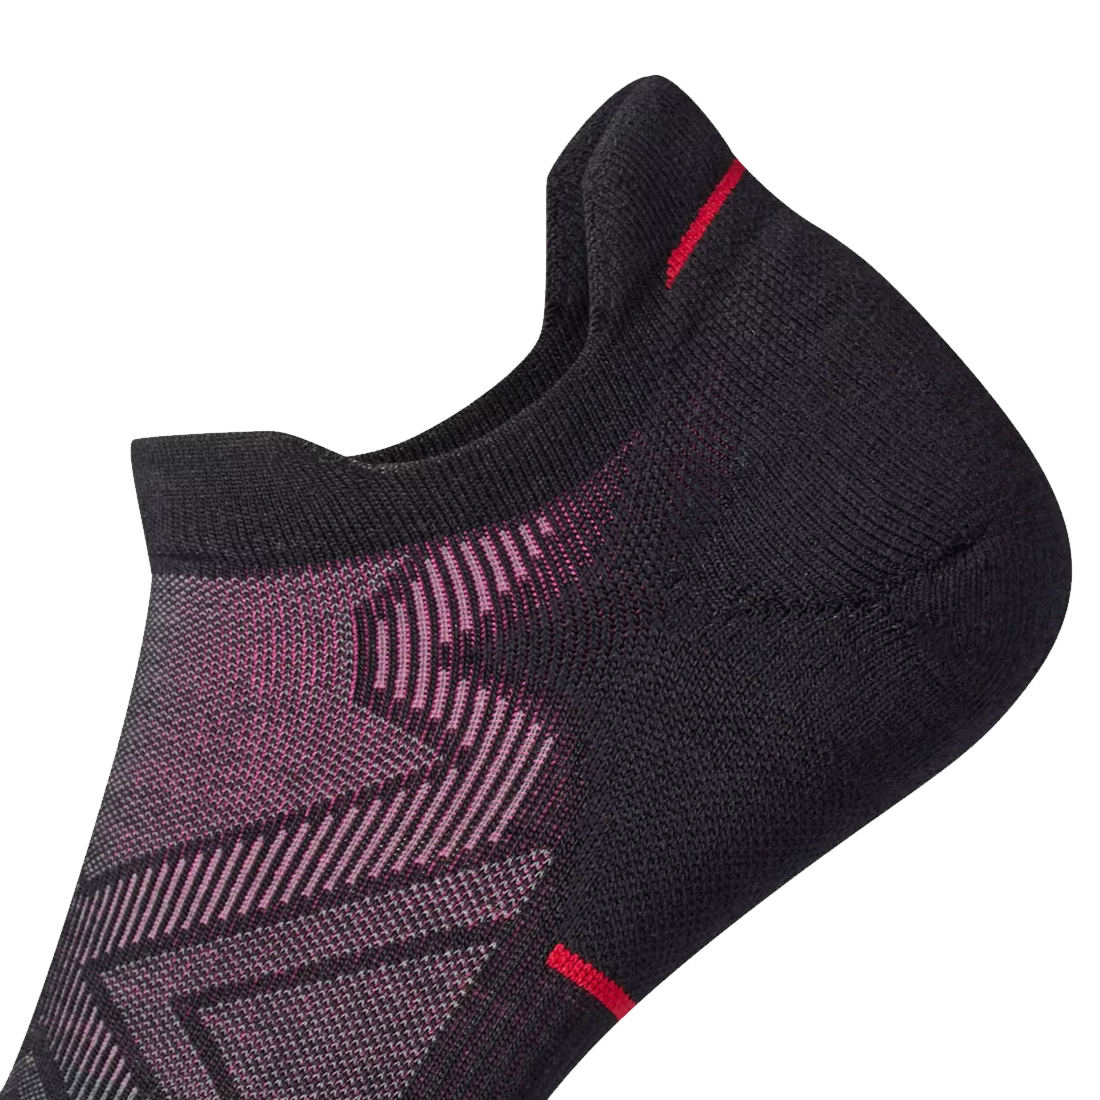 Women's Run Targeted Cushion Low Ankle alternate view